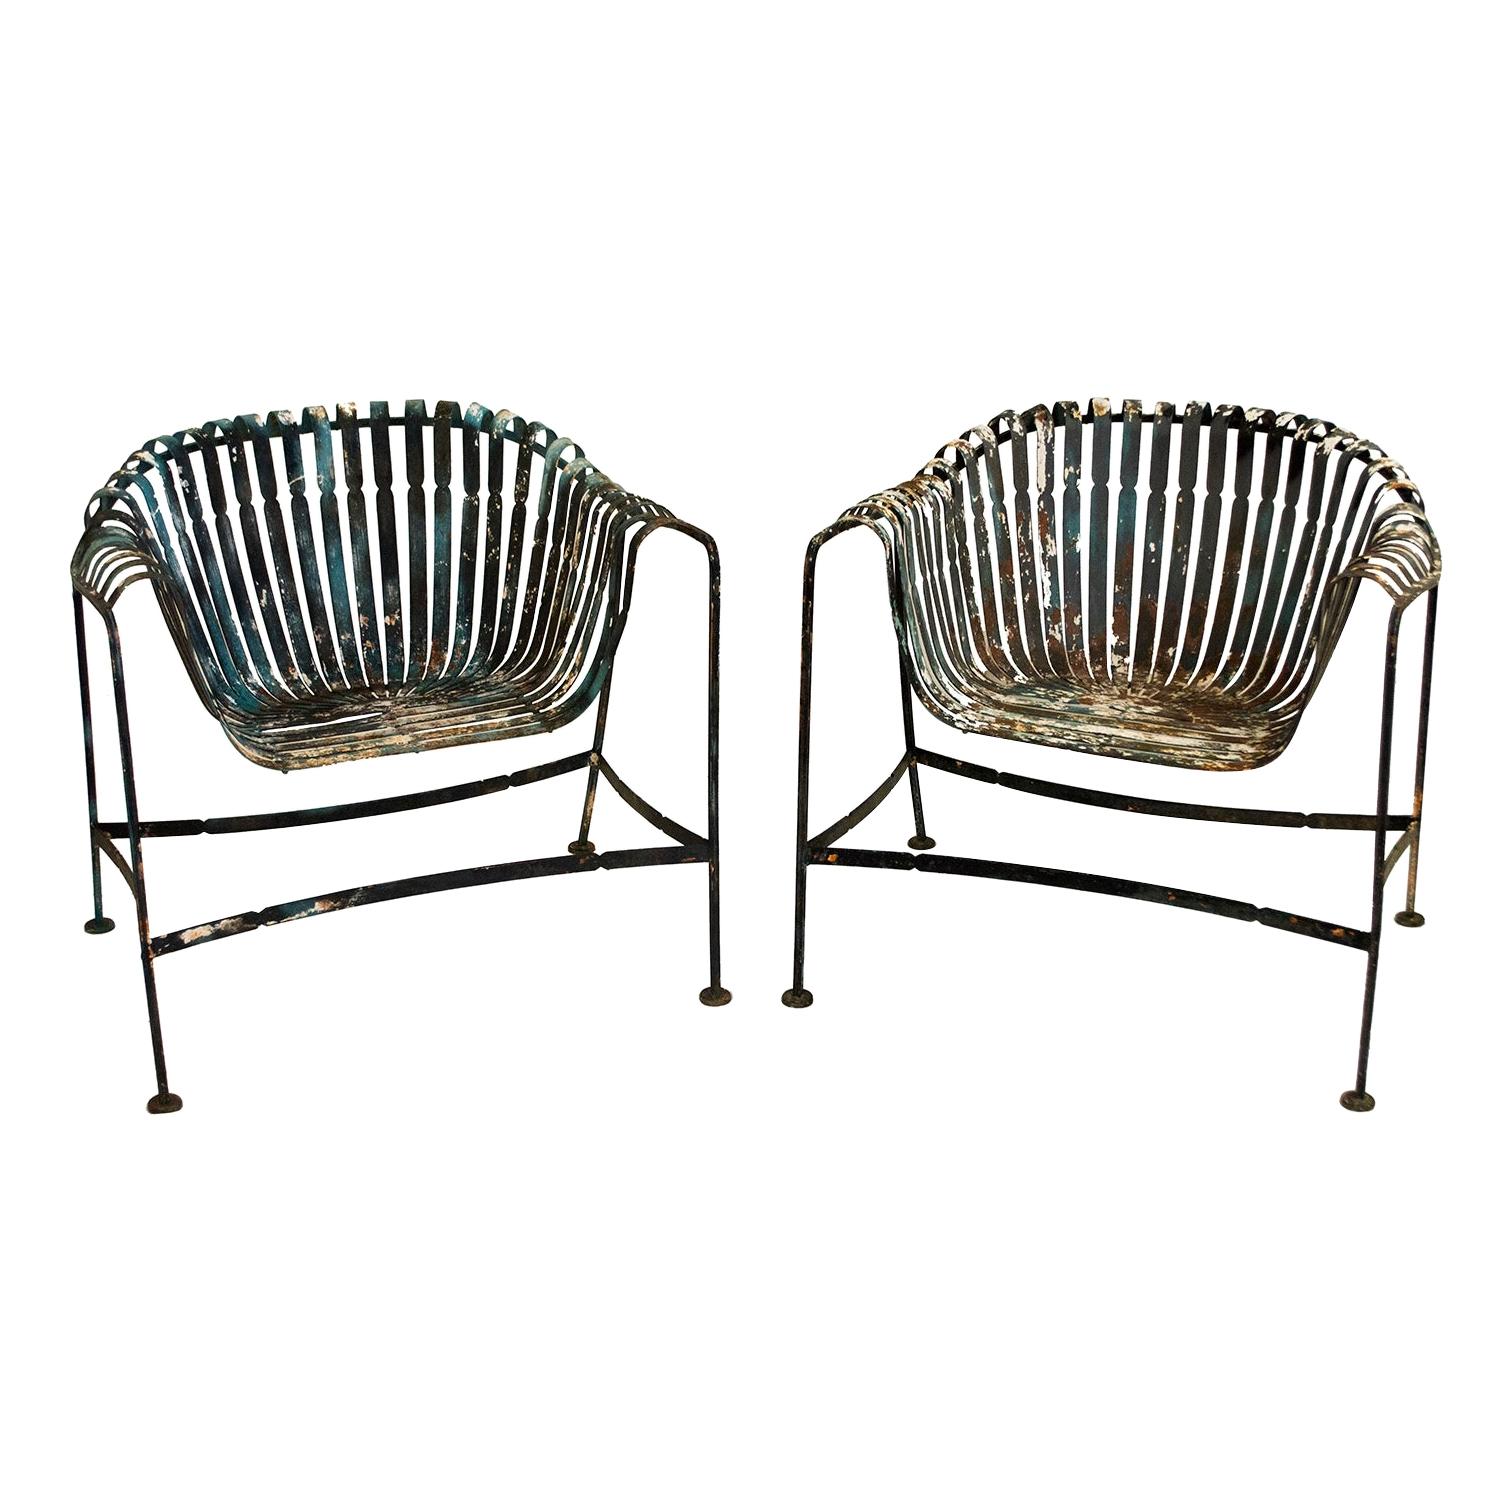 Francois Carre Inspired French Garden Chairs by Woodard